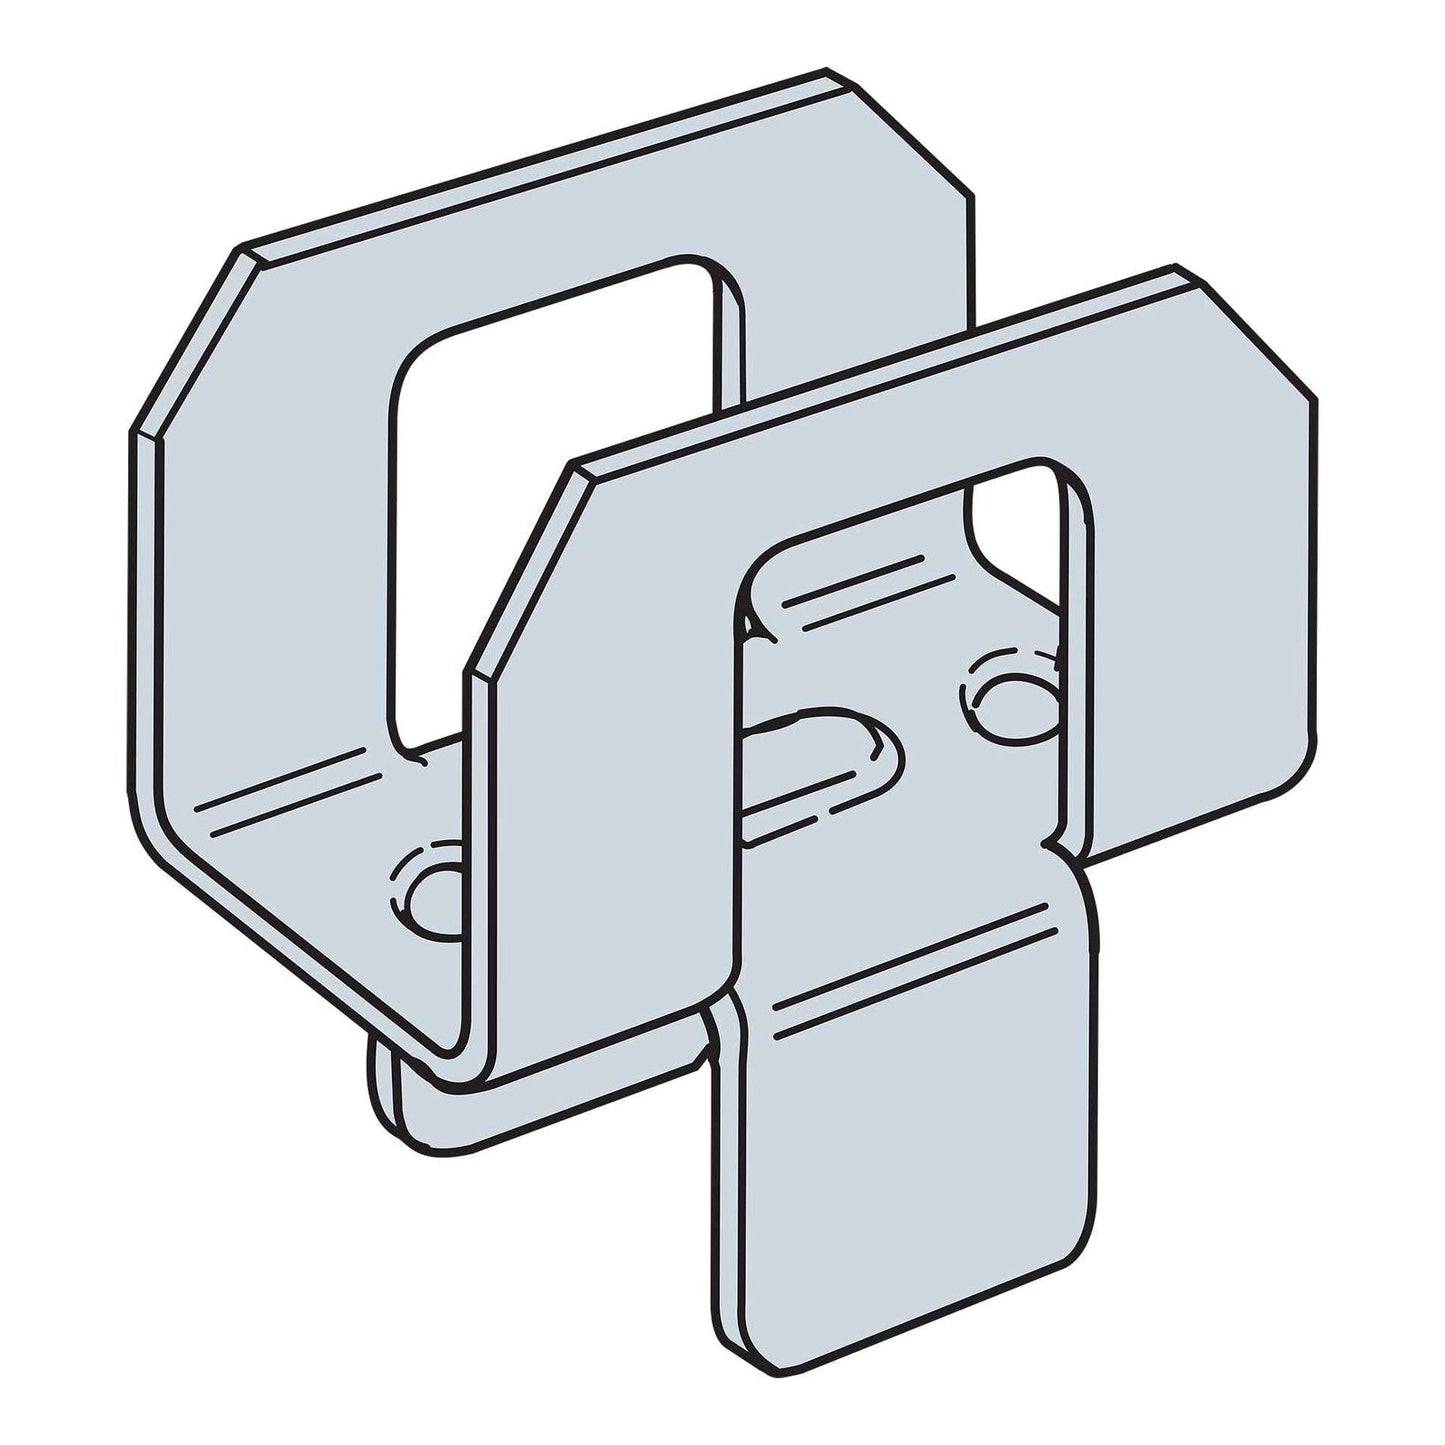 Simpson PSCL-3/4R50 - 3/4" Plywood Sheathing Clips Illustration